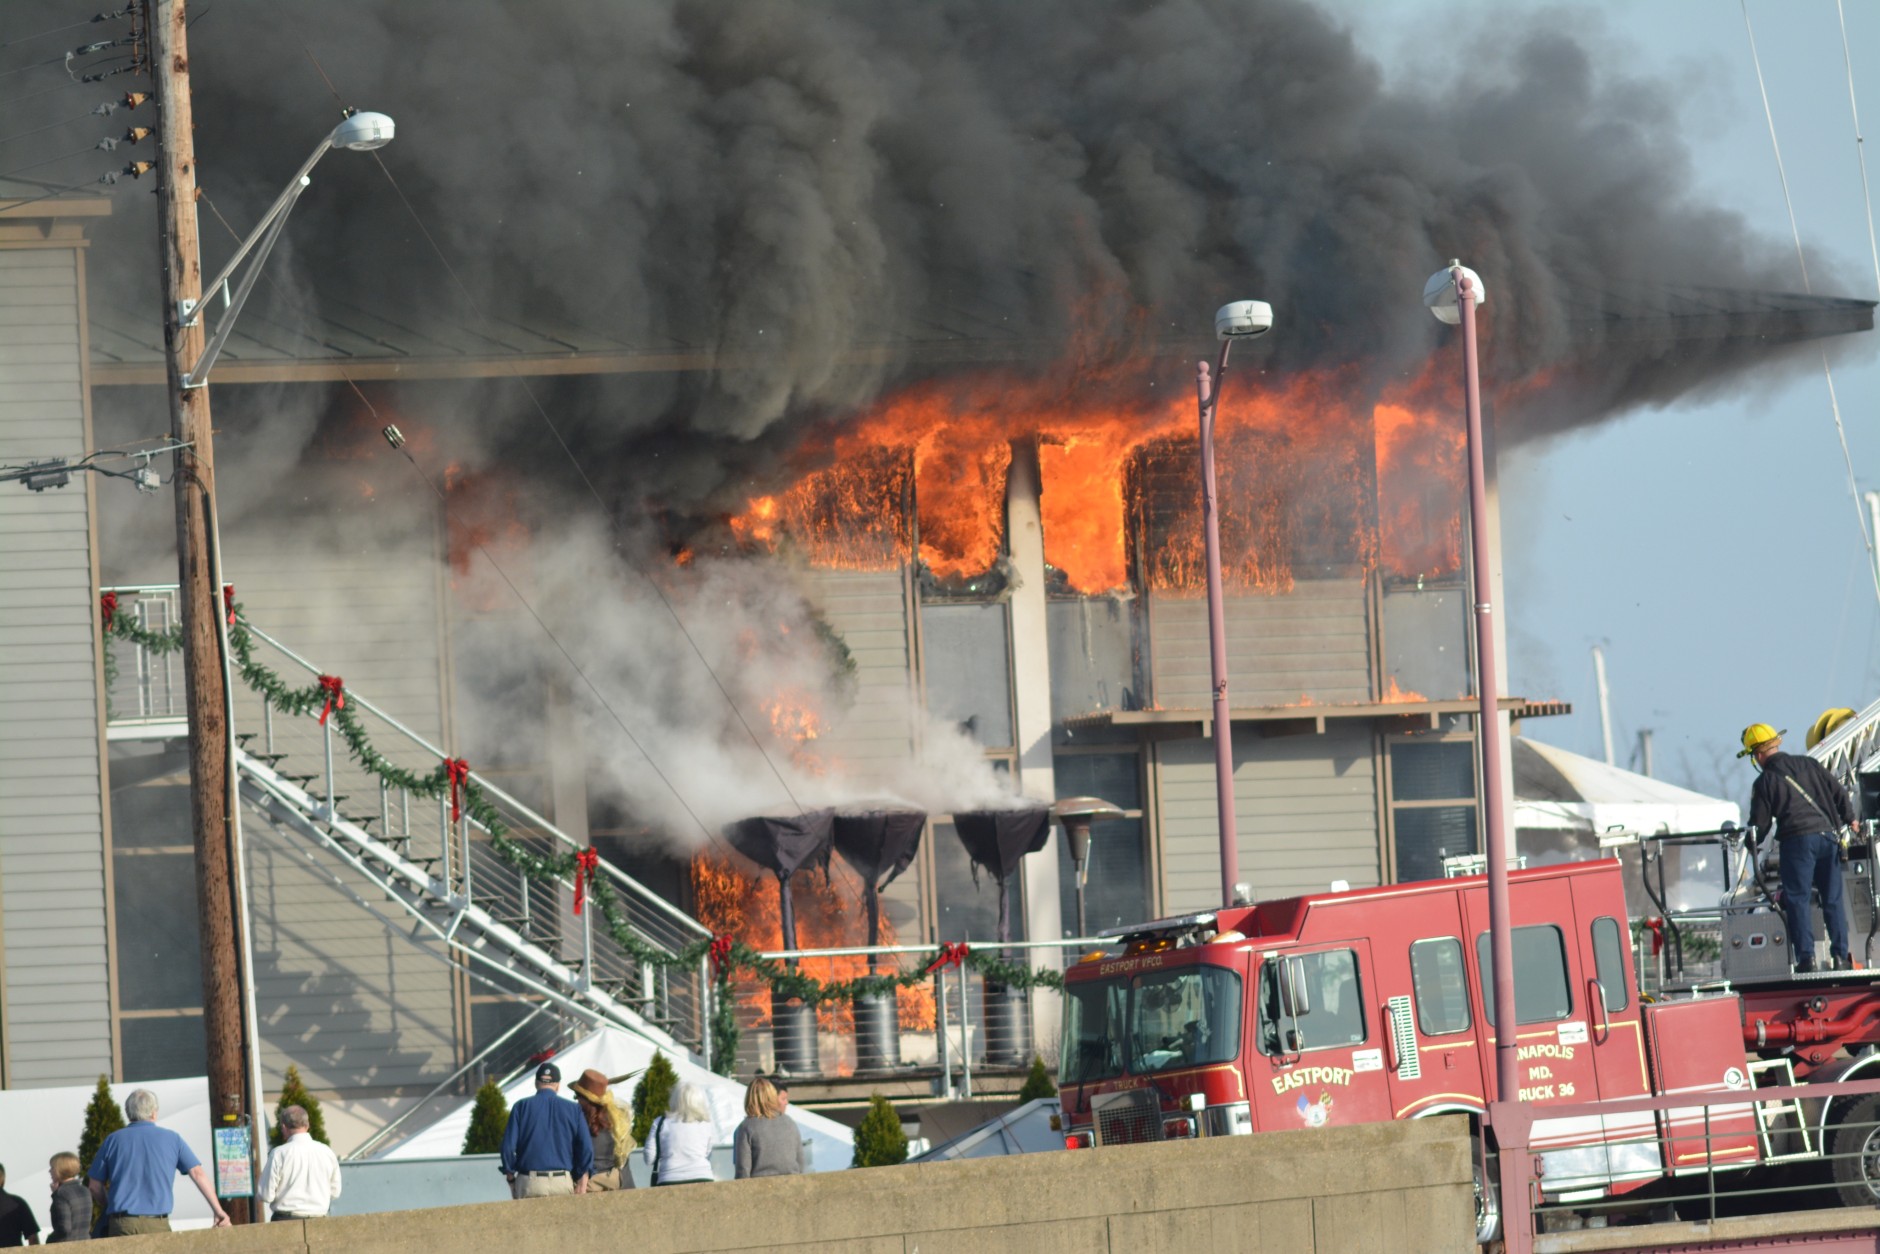 Fire fighters battle a blaze that broke out at Annapolis Yacht Club on Saturday, Dec. 12, 2015. (Photo courtesy of Bob Waugh)